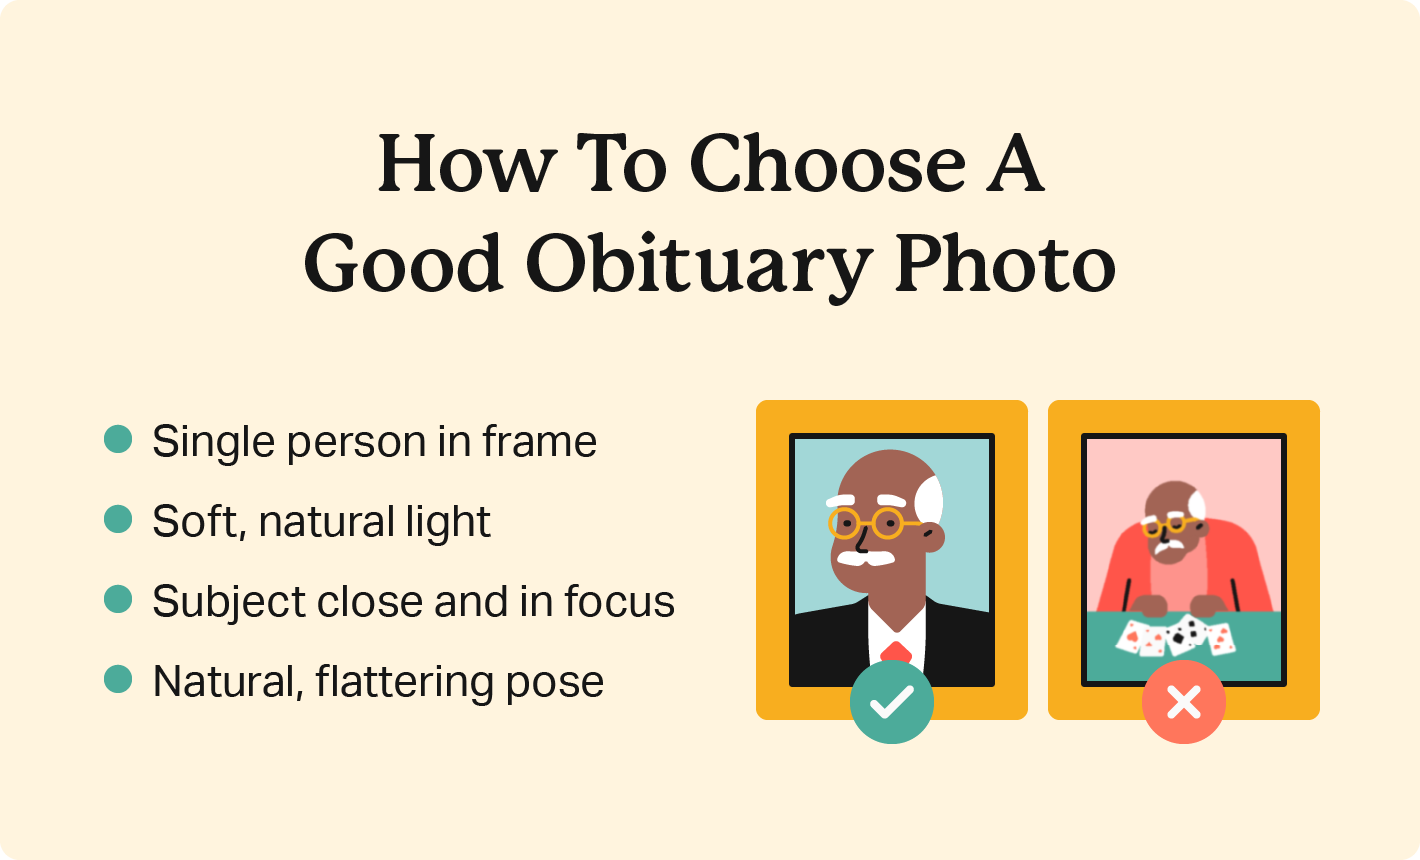 Side-by-side illustrations represent a good and bad obituary photo, with written photo tips.